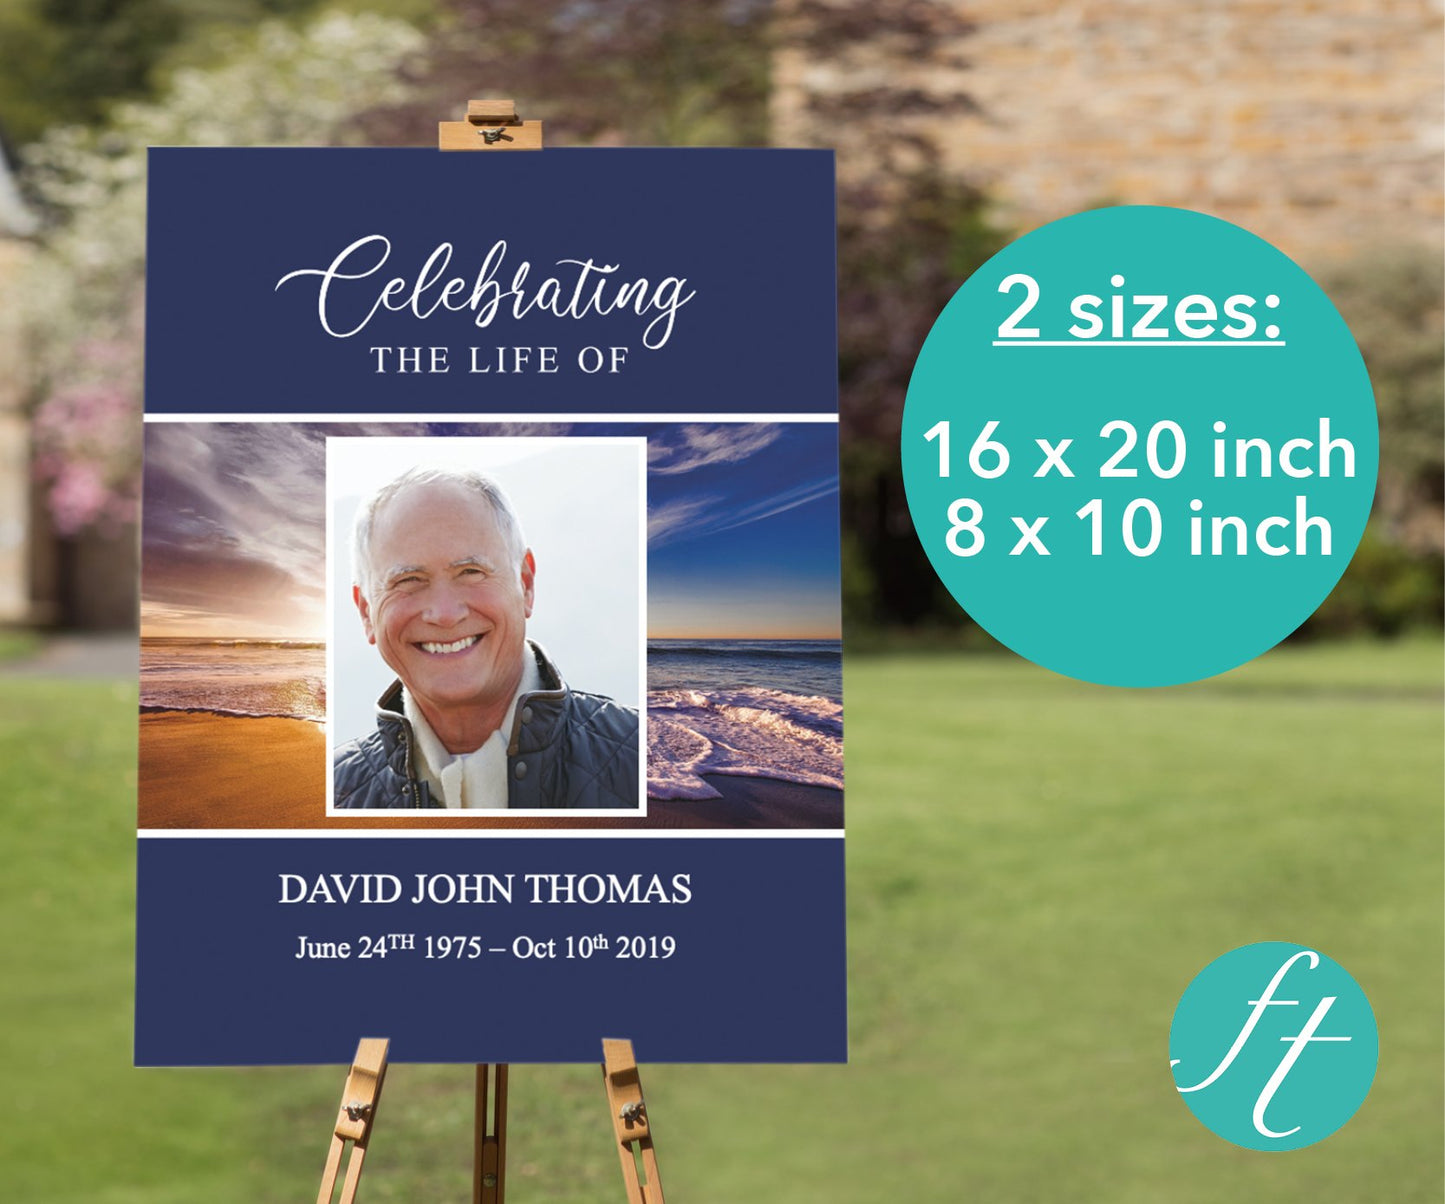 Personalized Photo Celebration of Life Welcome Sign Poster, Funeral Welcome  Sign, Memorial Sign Board, In Loving Memory of Loved One, Celebration of